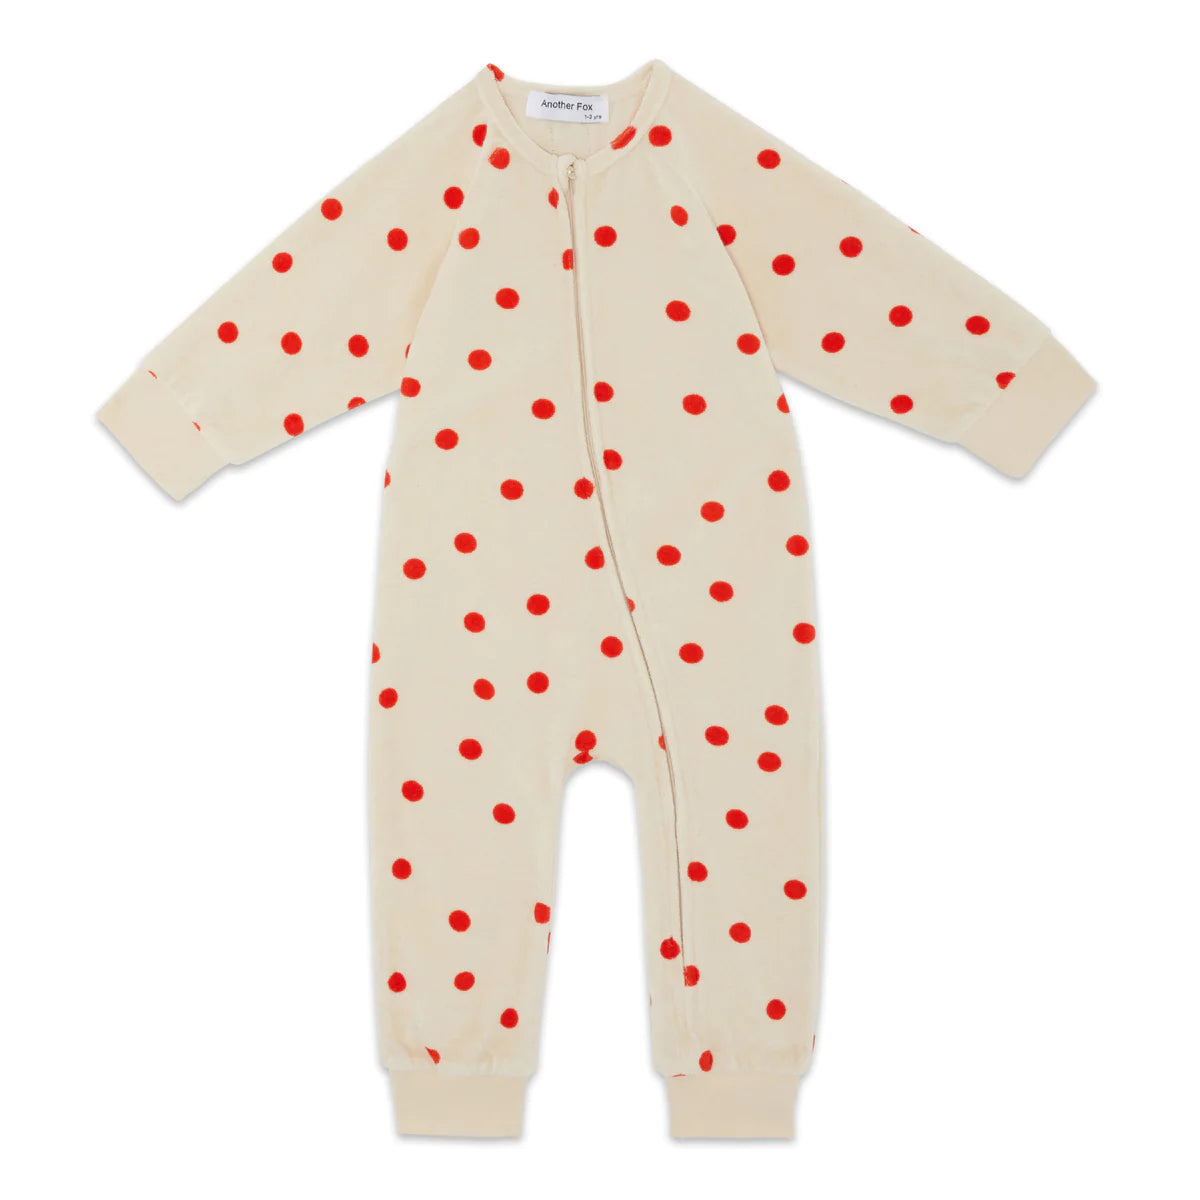 Red Dot Terry Towel Sleepsuit